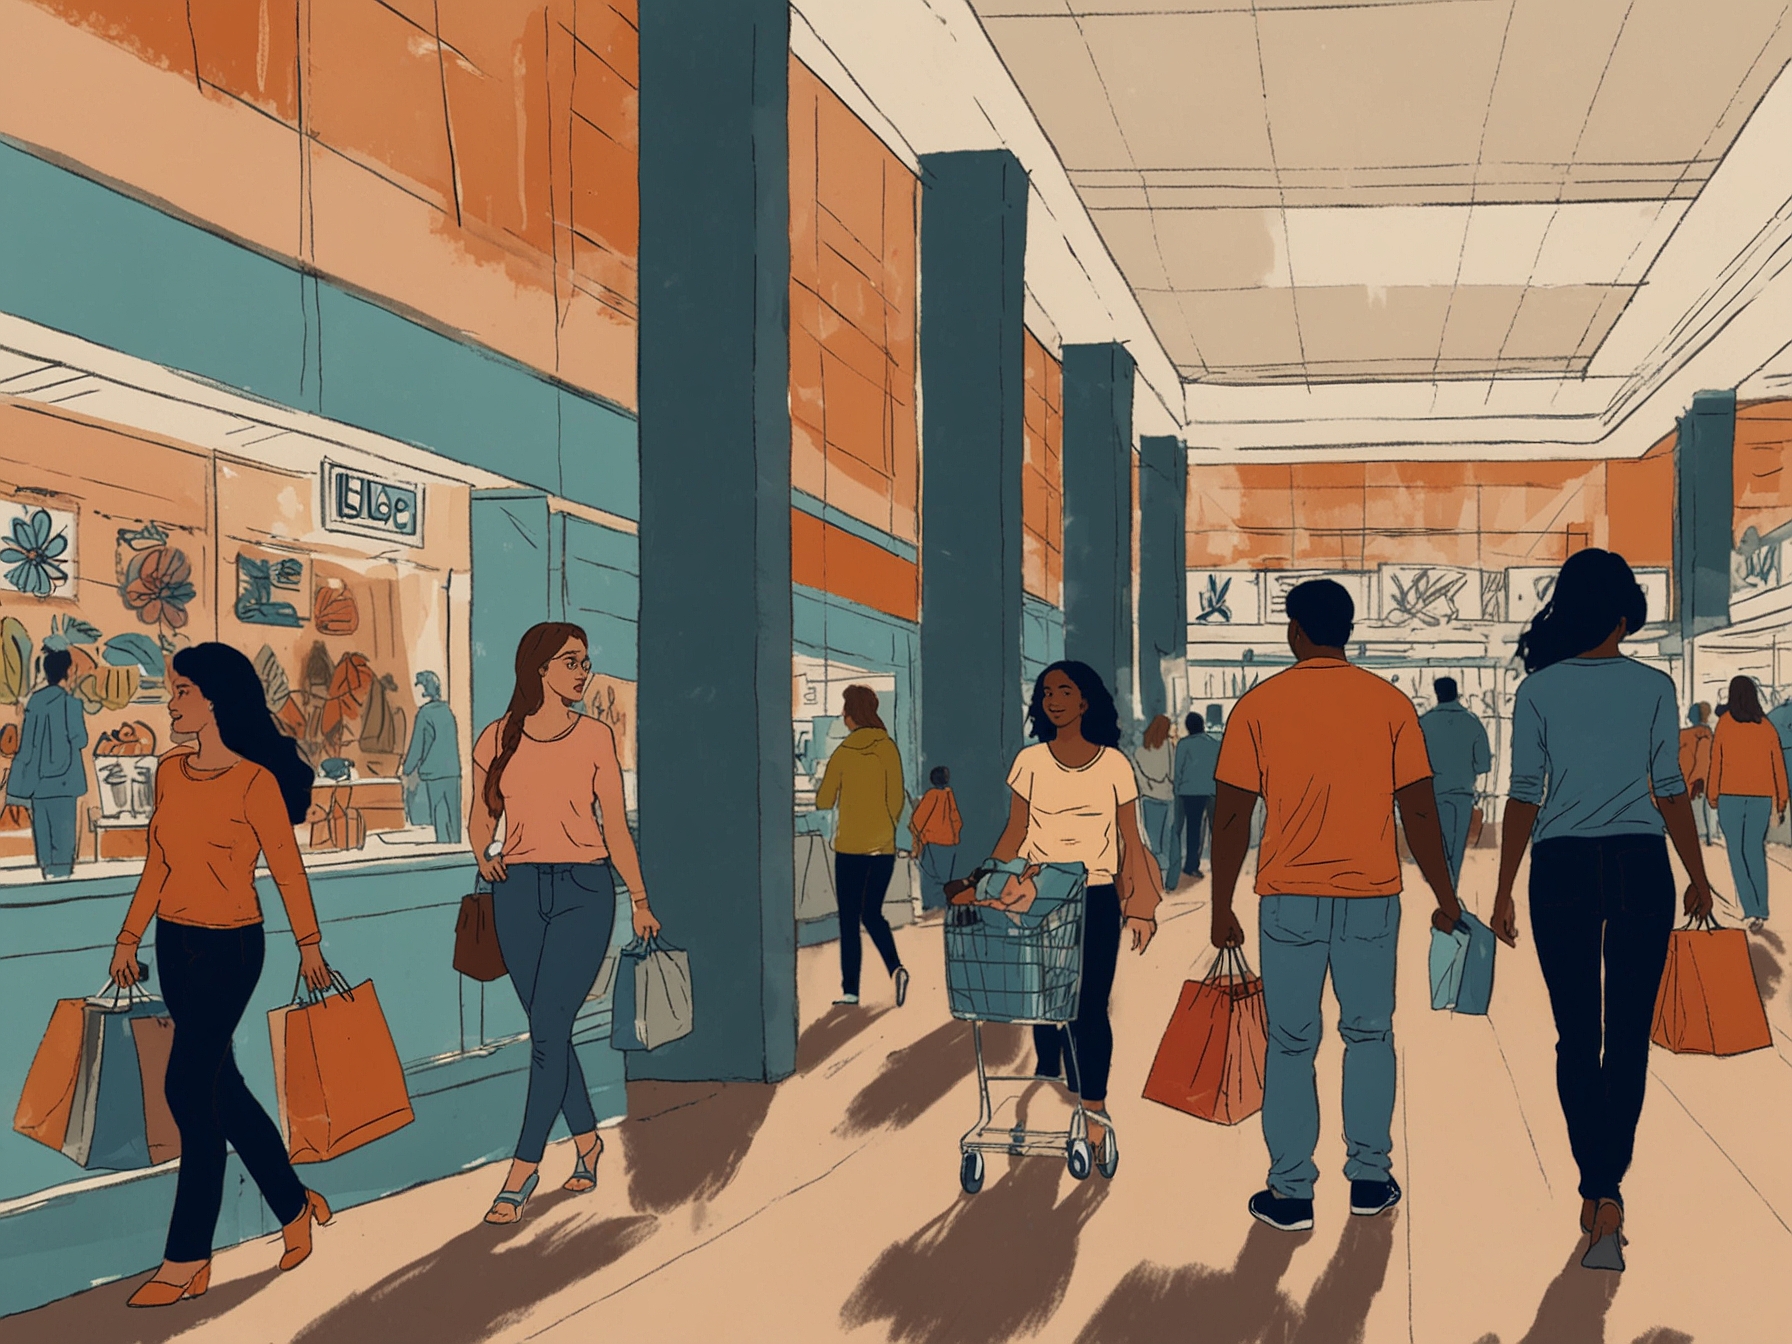 A diverse group of people shopping at a mall, showcasing boosted consumer spending and confidence. Displays of vibrant retail activity reflect optimism despite economic pressures.